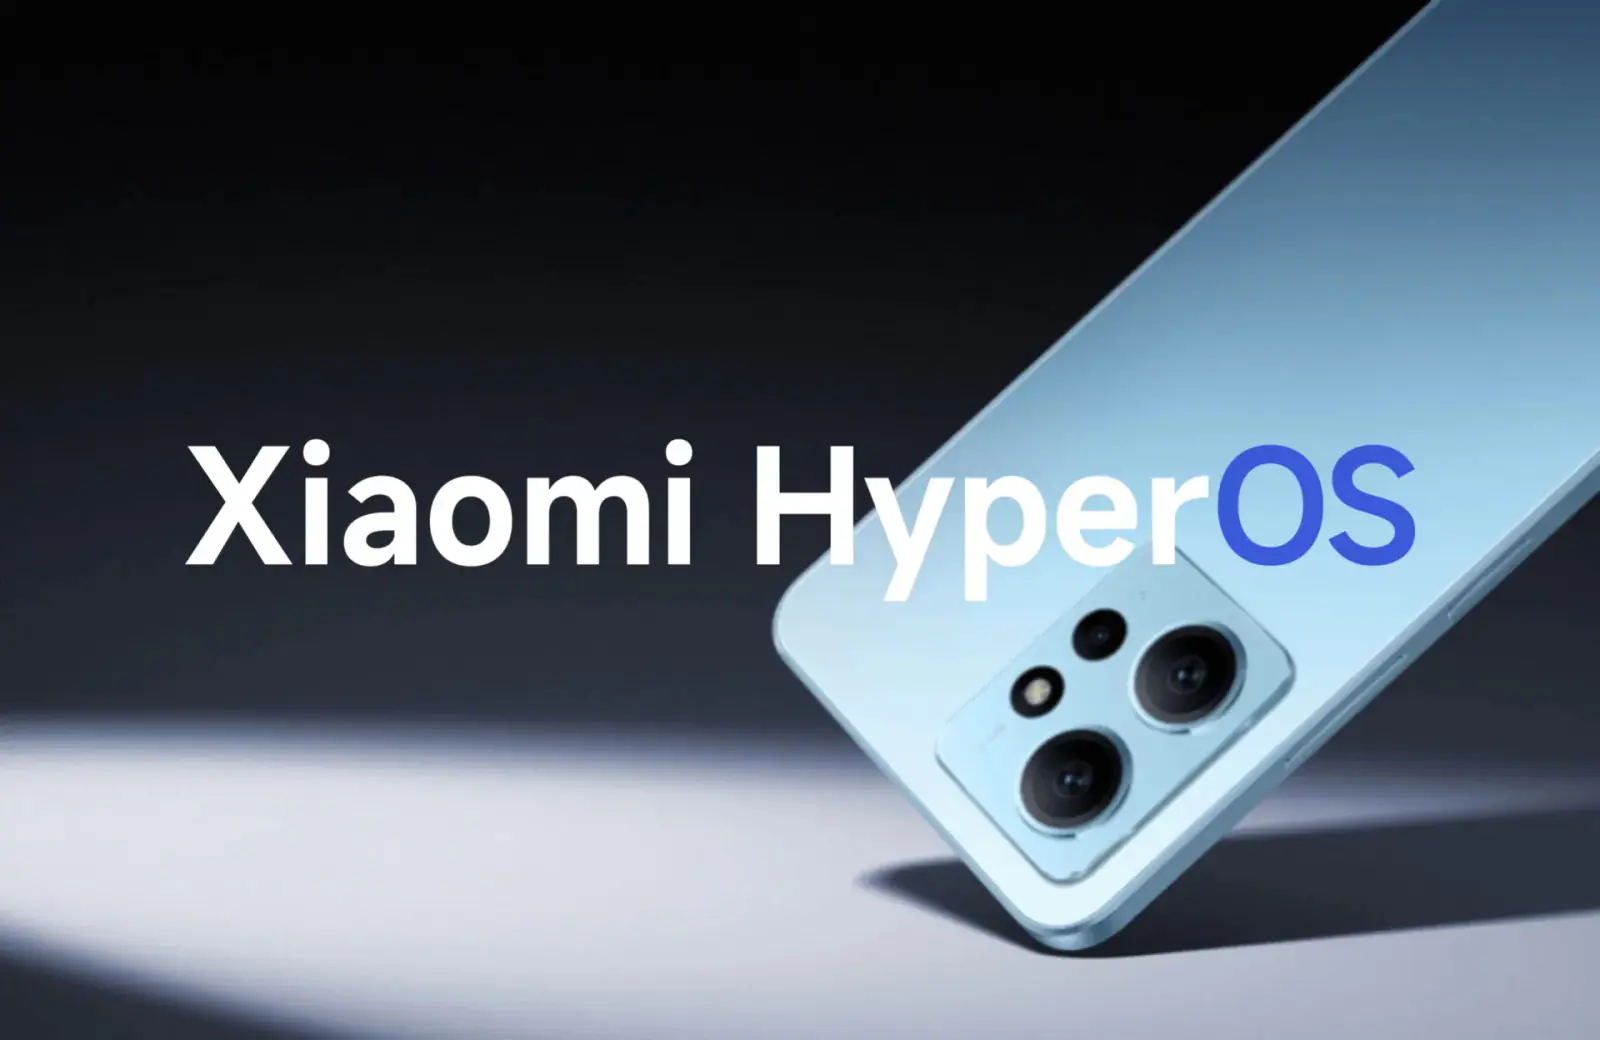 HyperOS will soon be available for Xiaomi users, these devices will get updates, know important details here